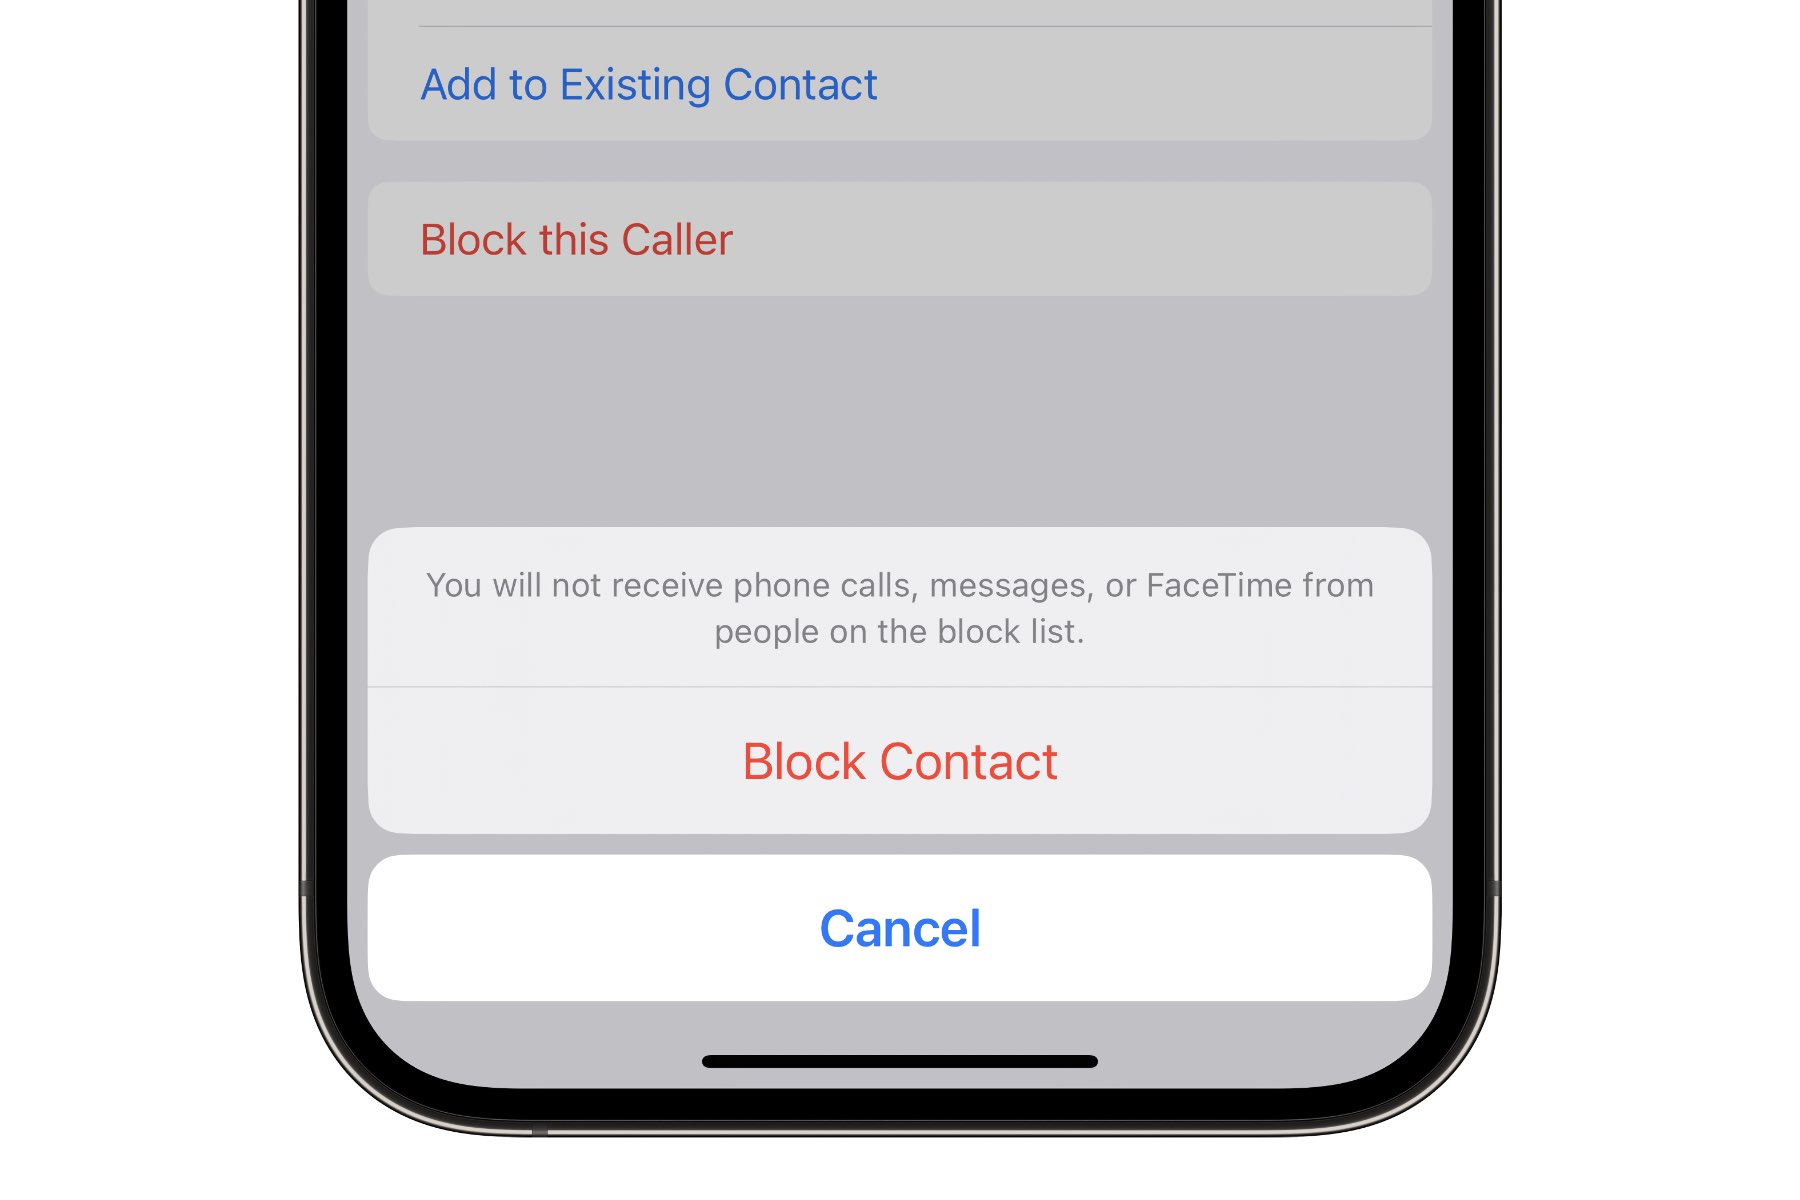 Block Contact confirmation in iPhone Messages app.